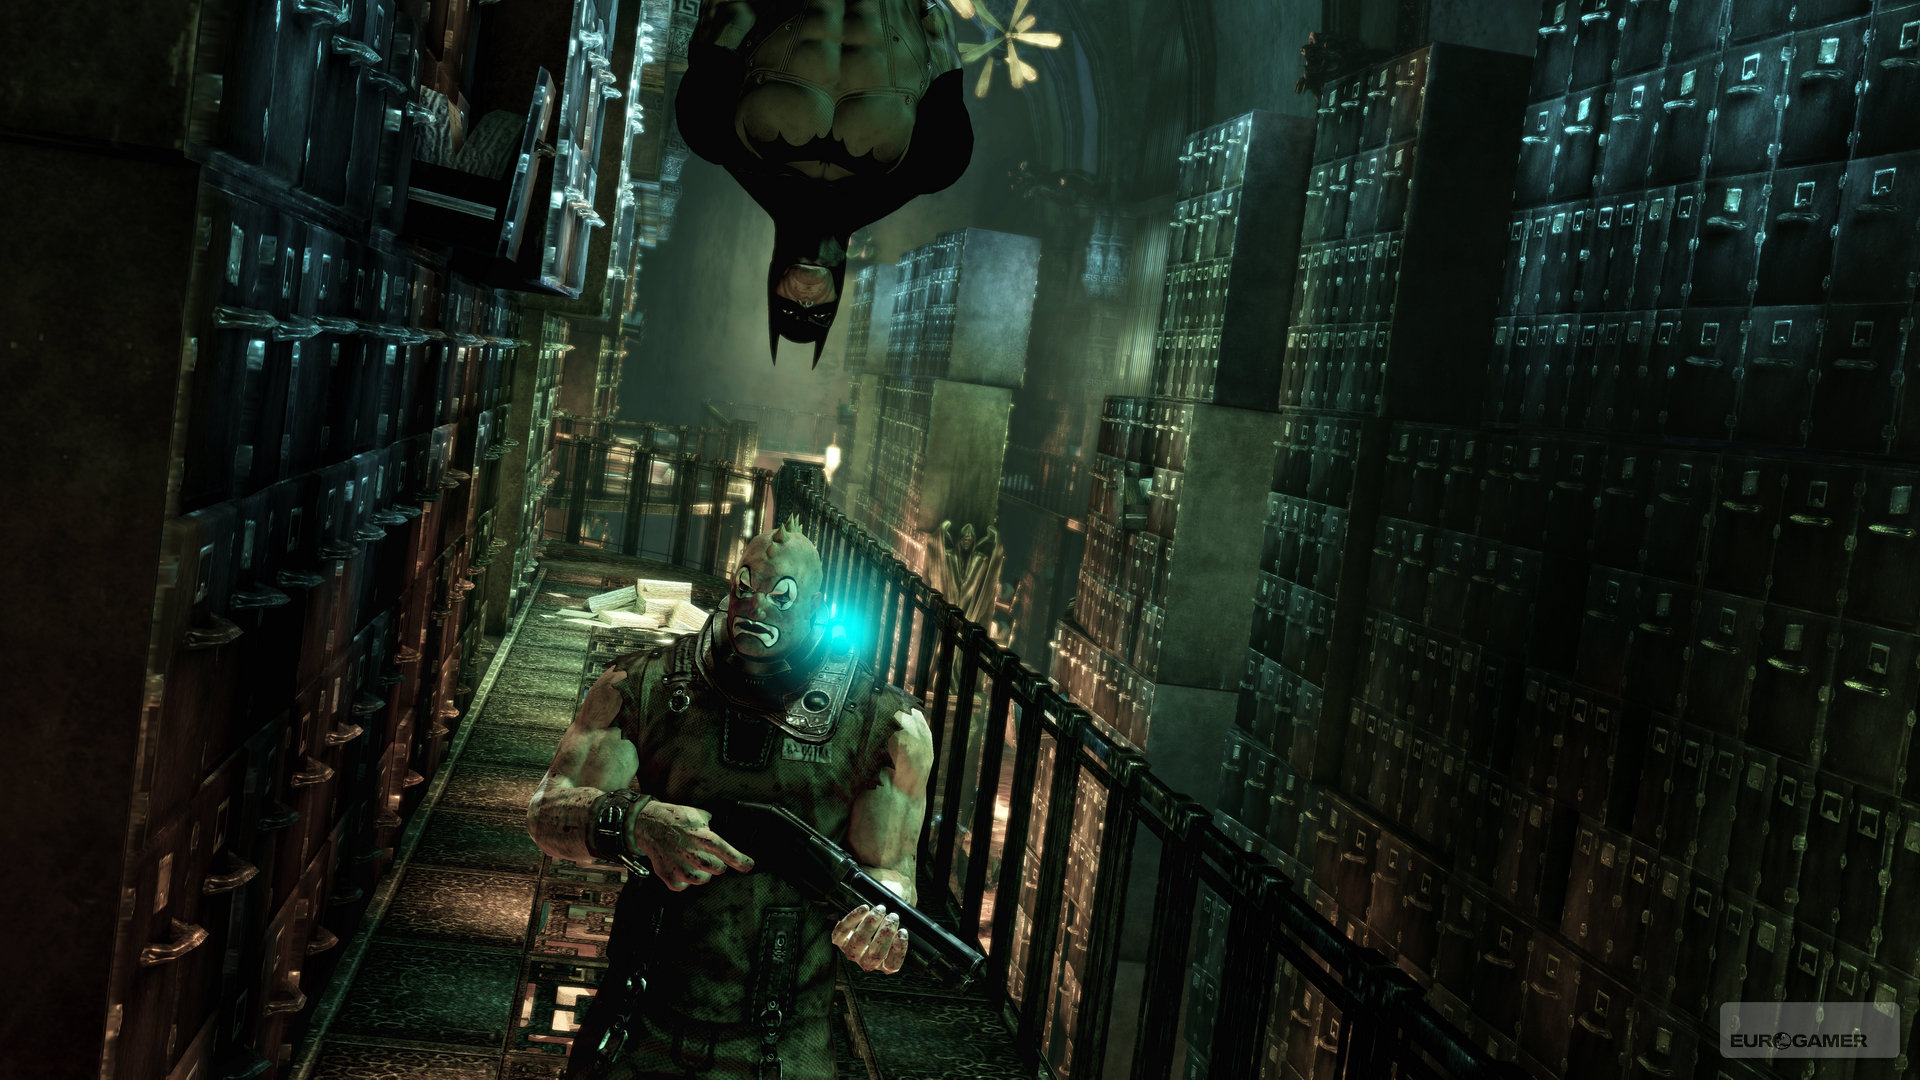 This Splinter Cell Conviction Wallpaper Is Available In Sizes